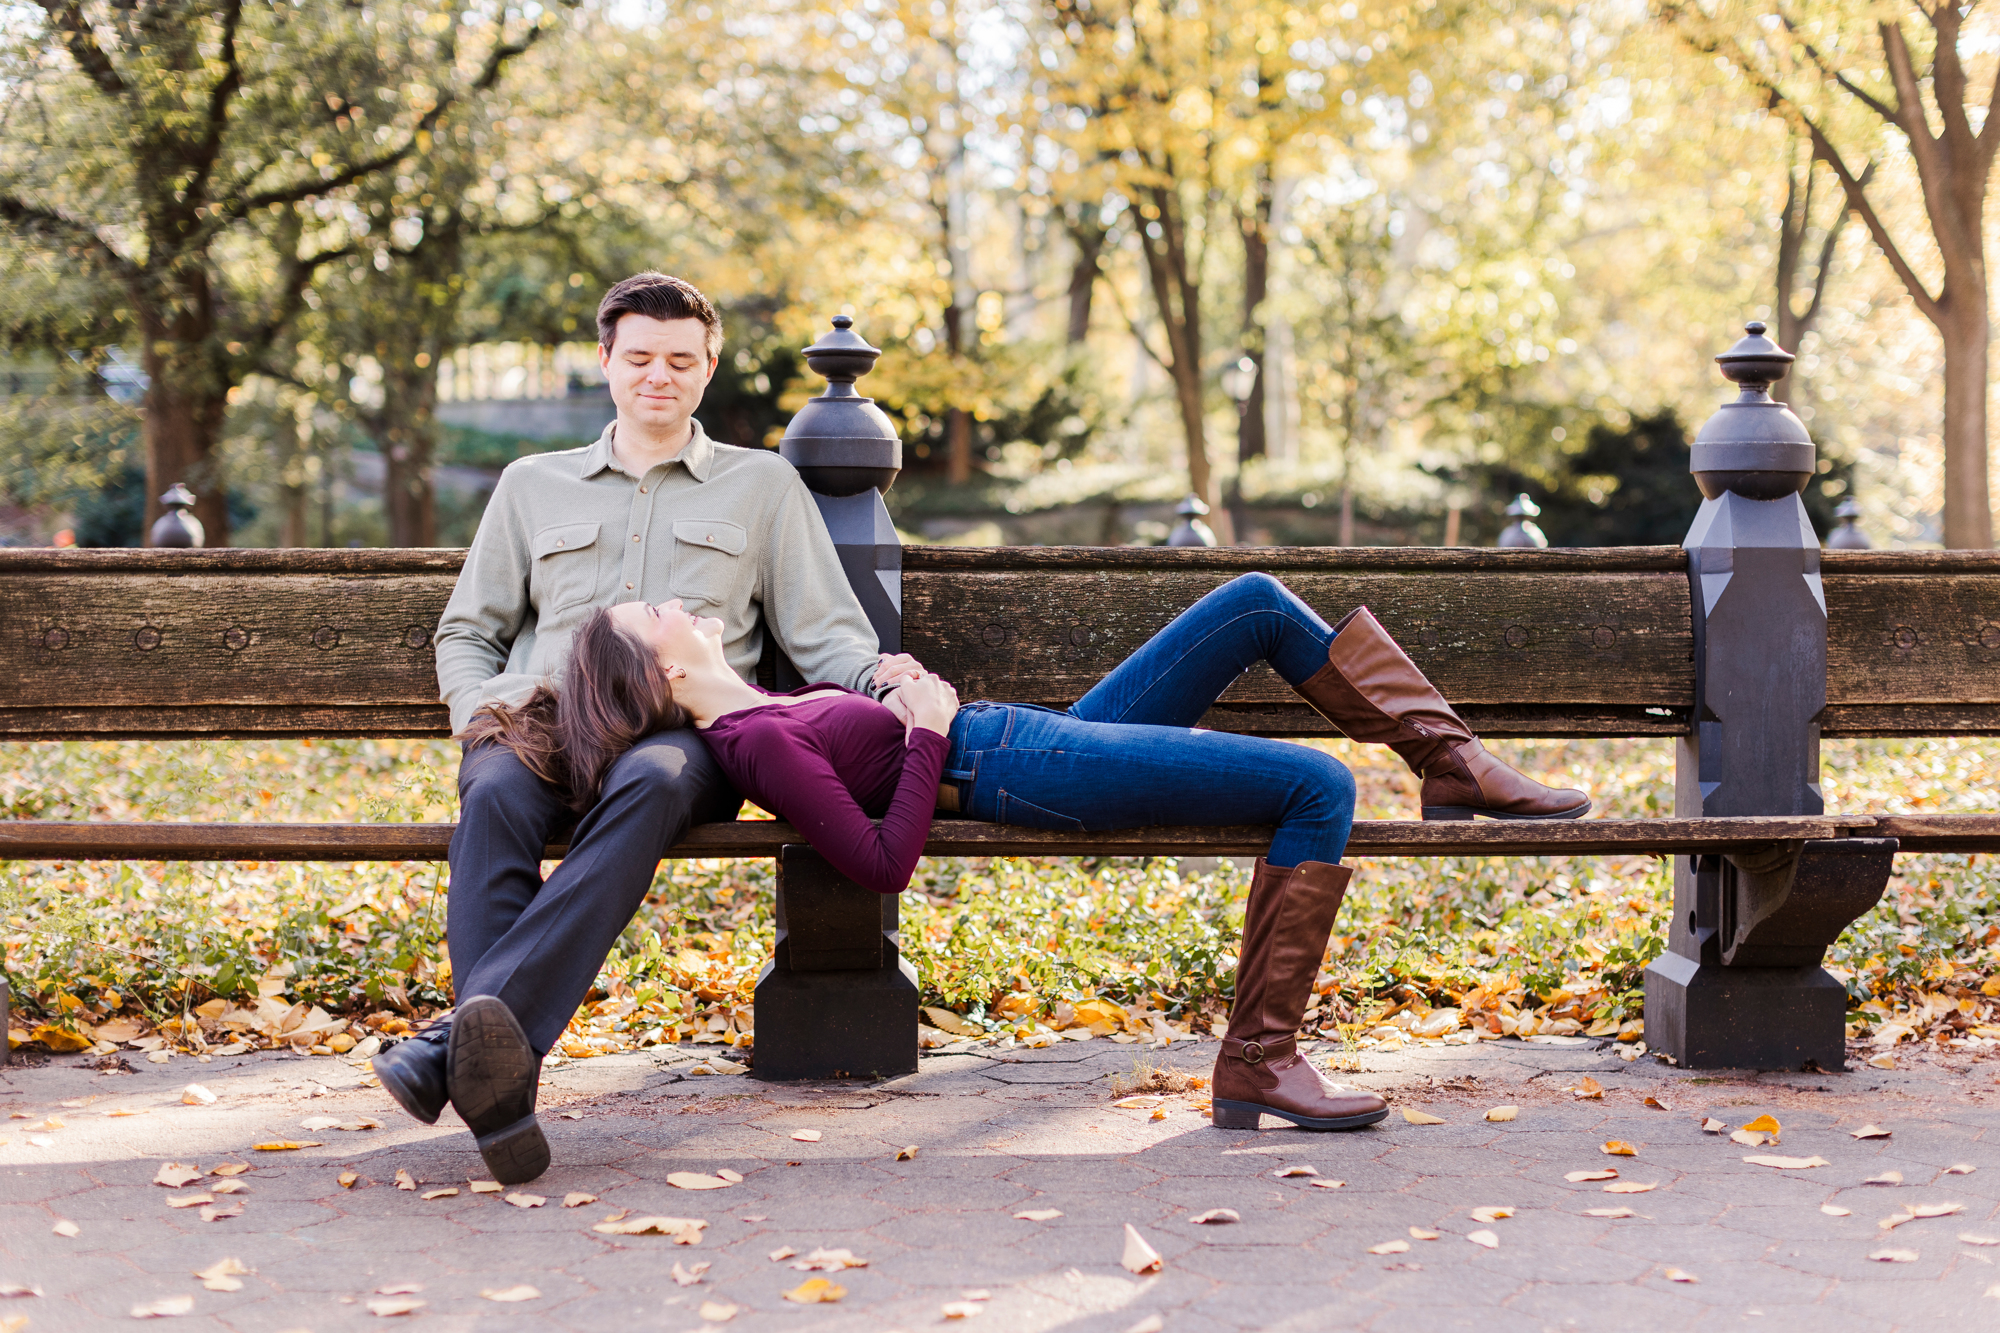 Playful Engagement Photoshoot in Central Park